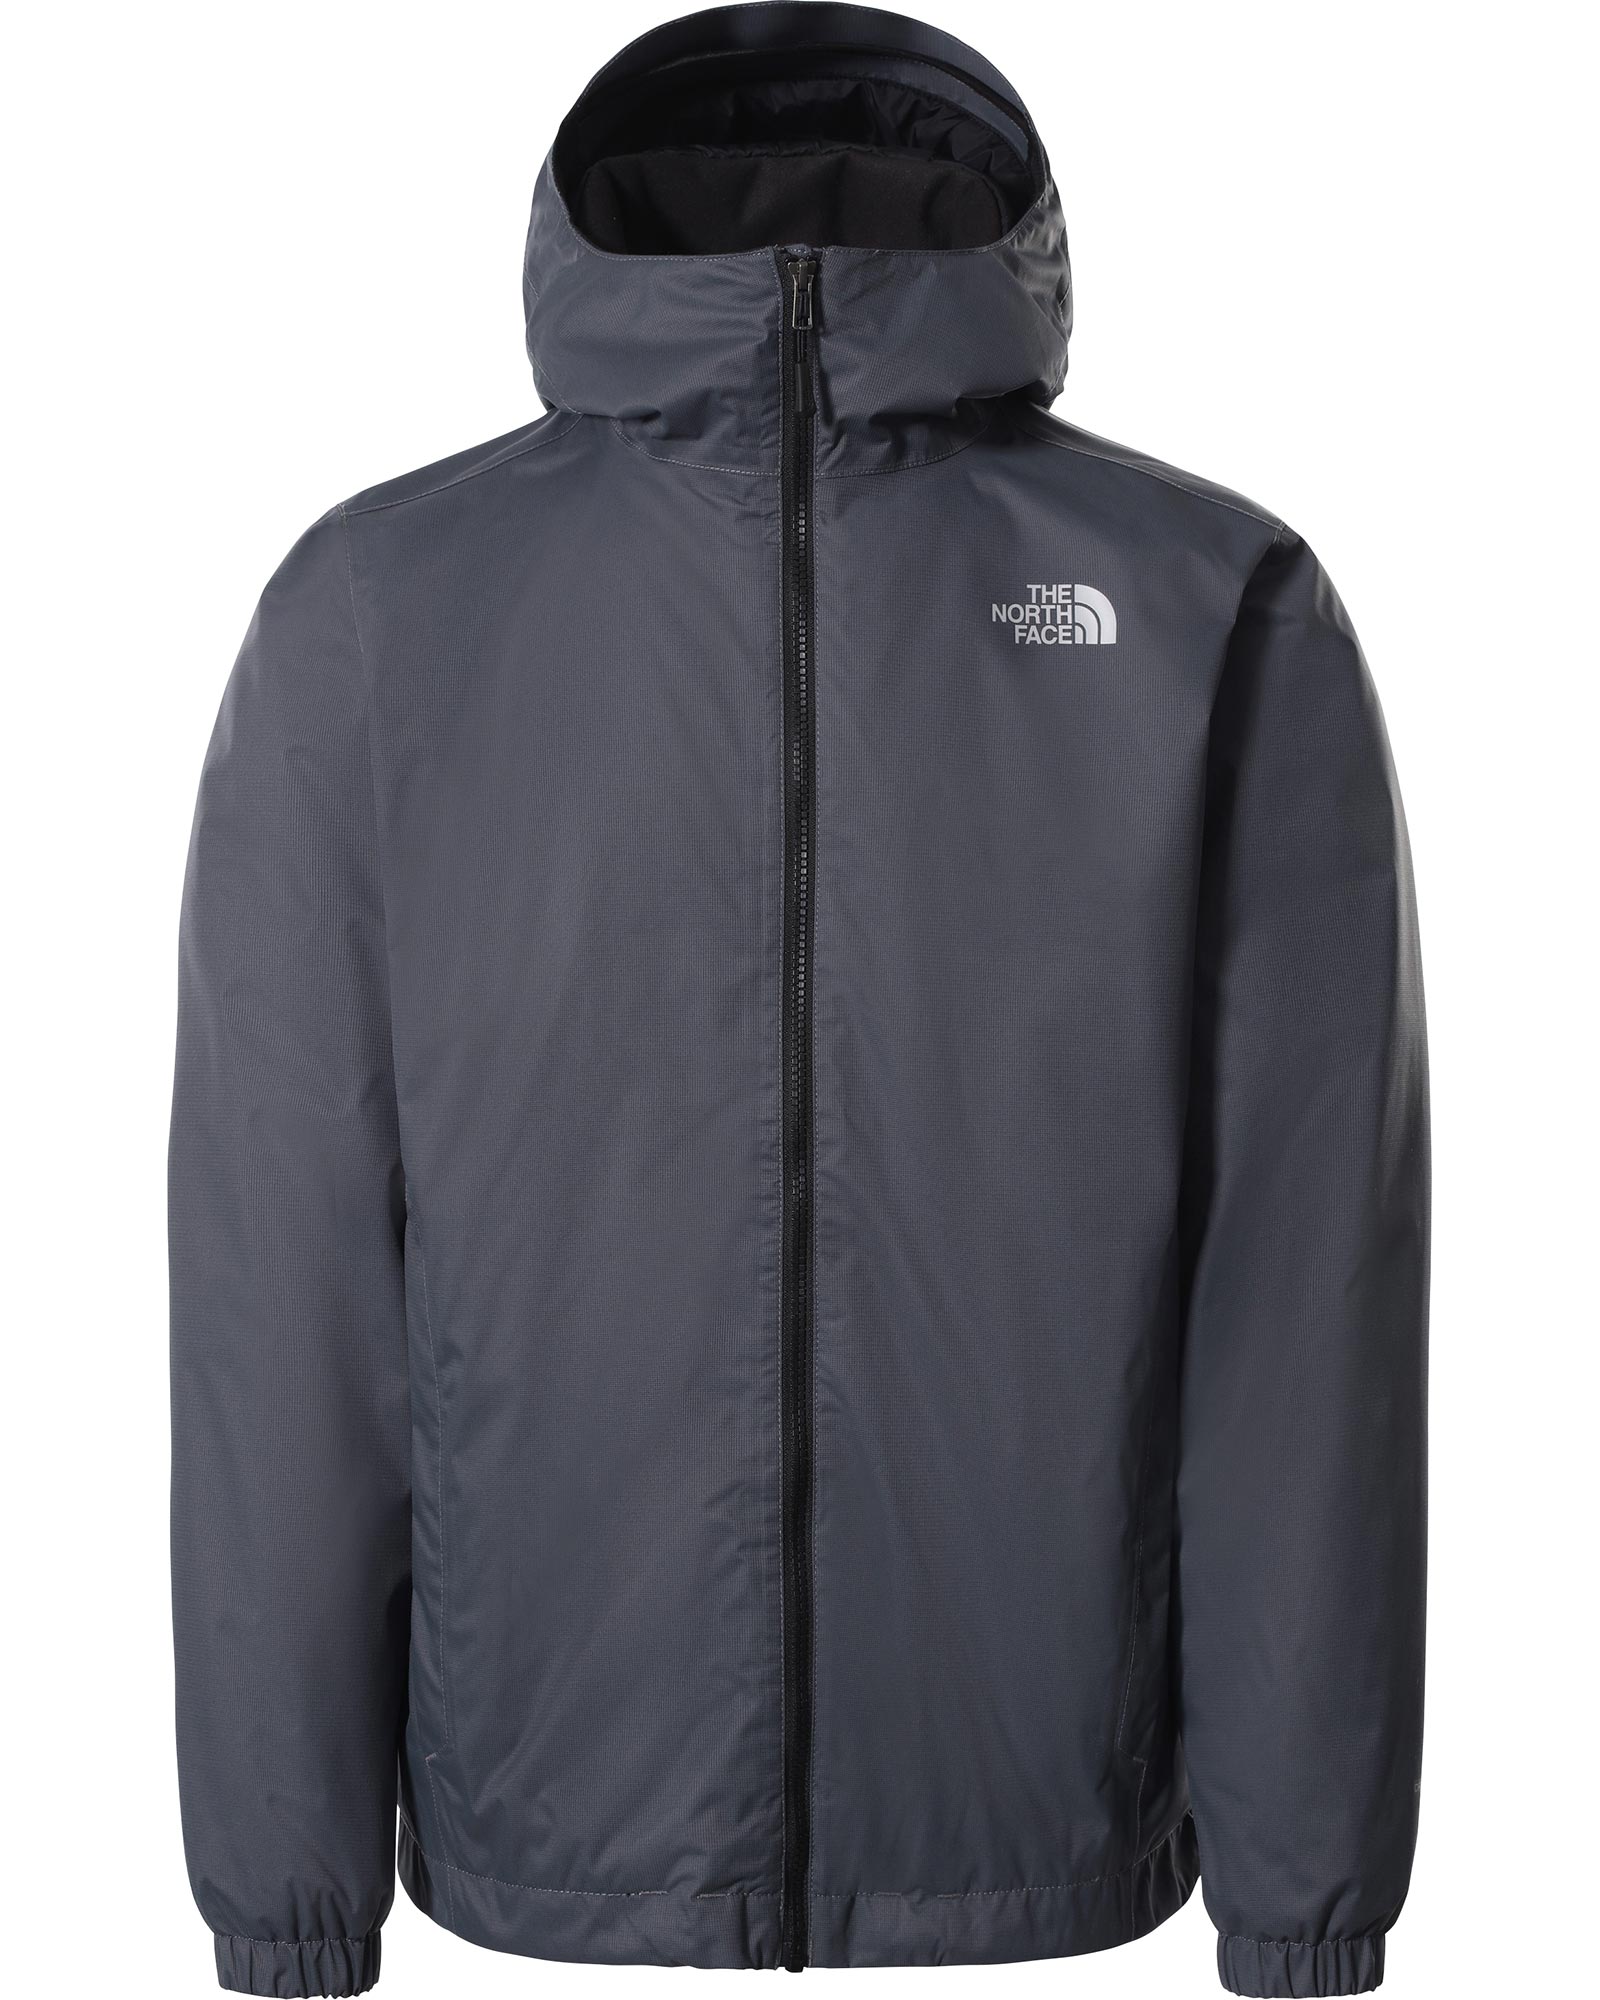 The North Face Quest DryVent Men’s Insulated Jacket - Vanadis Grey S